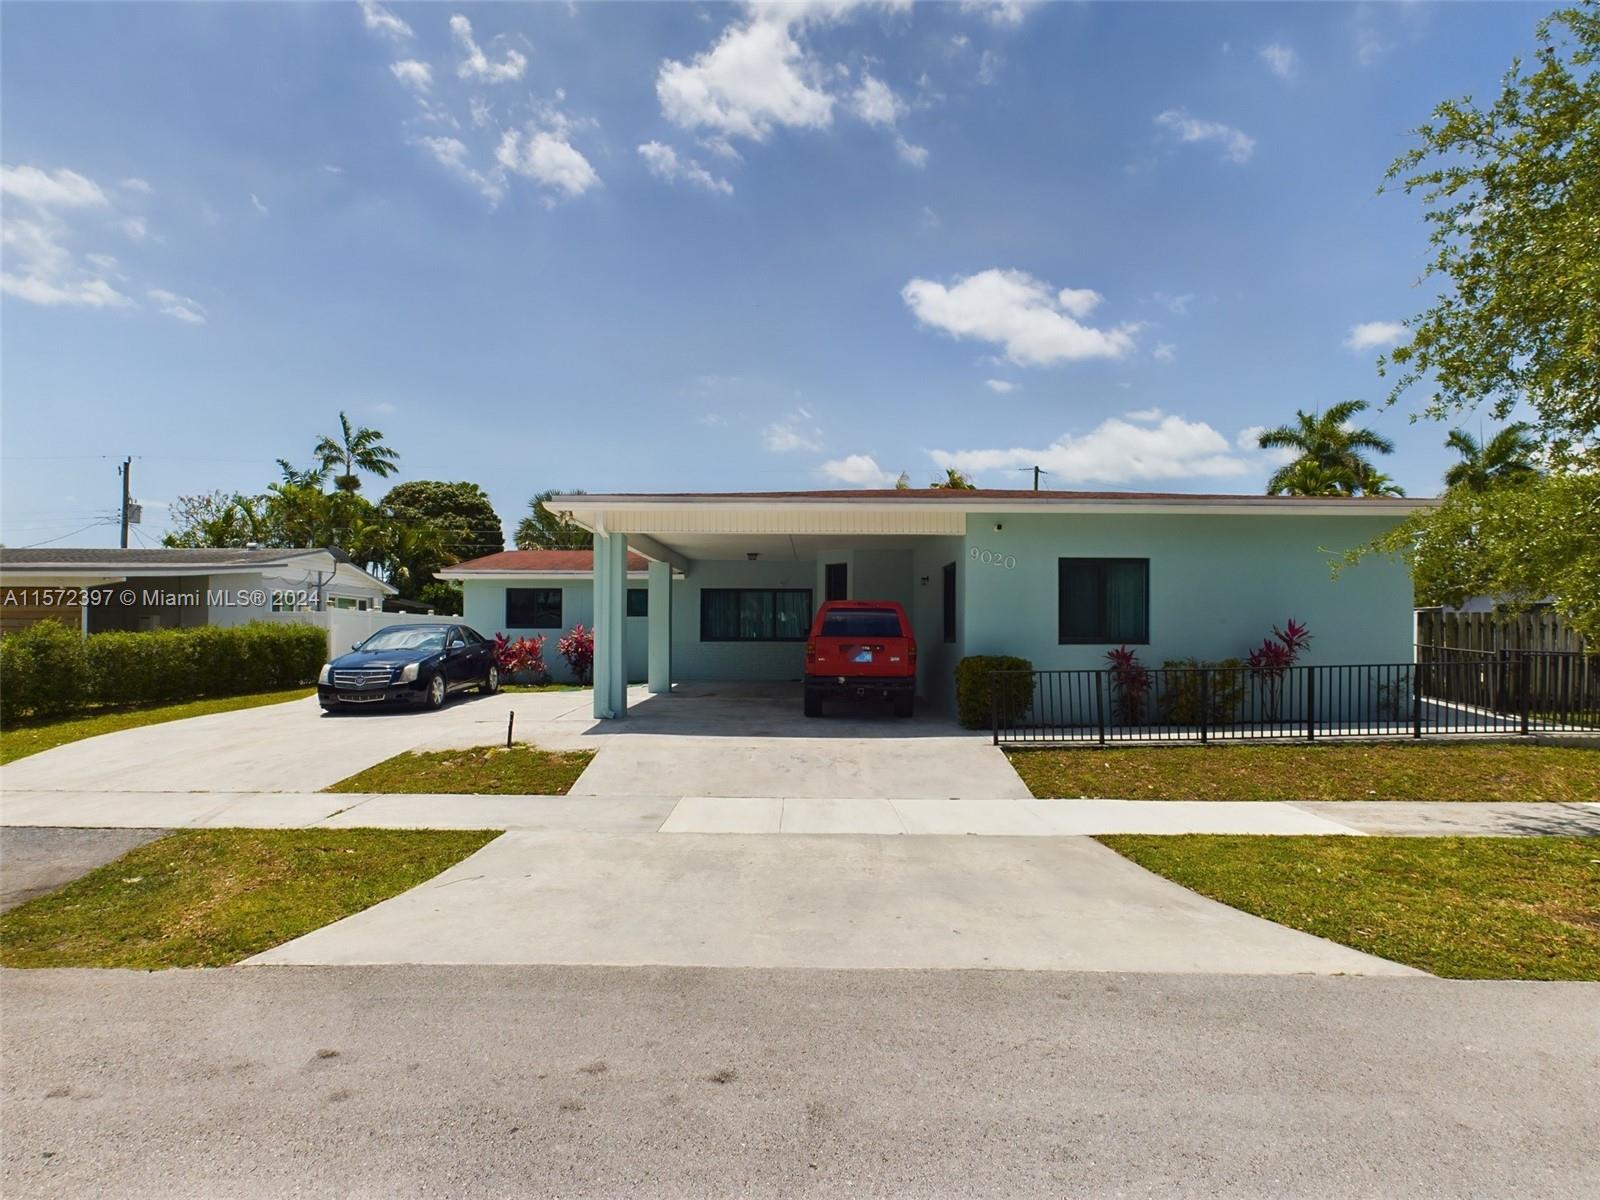 9020 SW 198th Ter, Cutler Bay, Florida 33157, 5 Bedrooms Bedrooms, ,3 BathroomsBathrooms,Residential,For Sale,9020 SW 198th Ter,A11572397